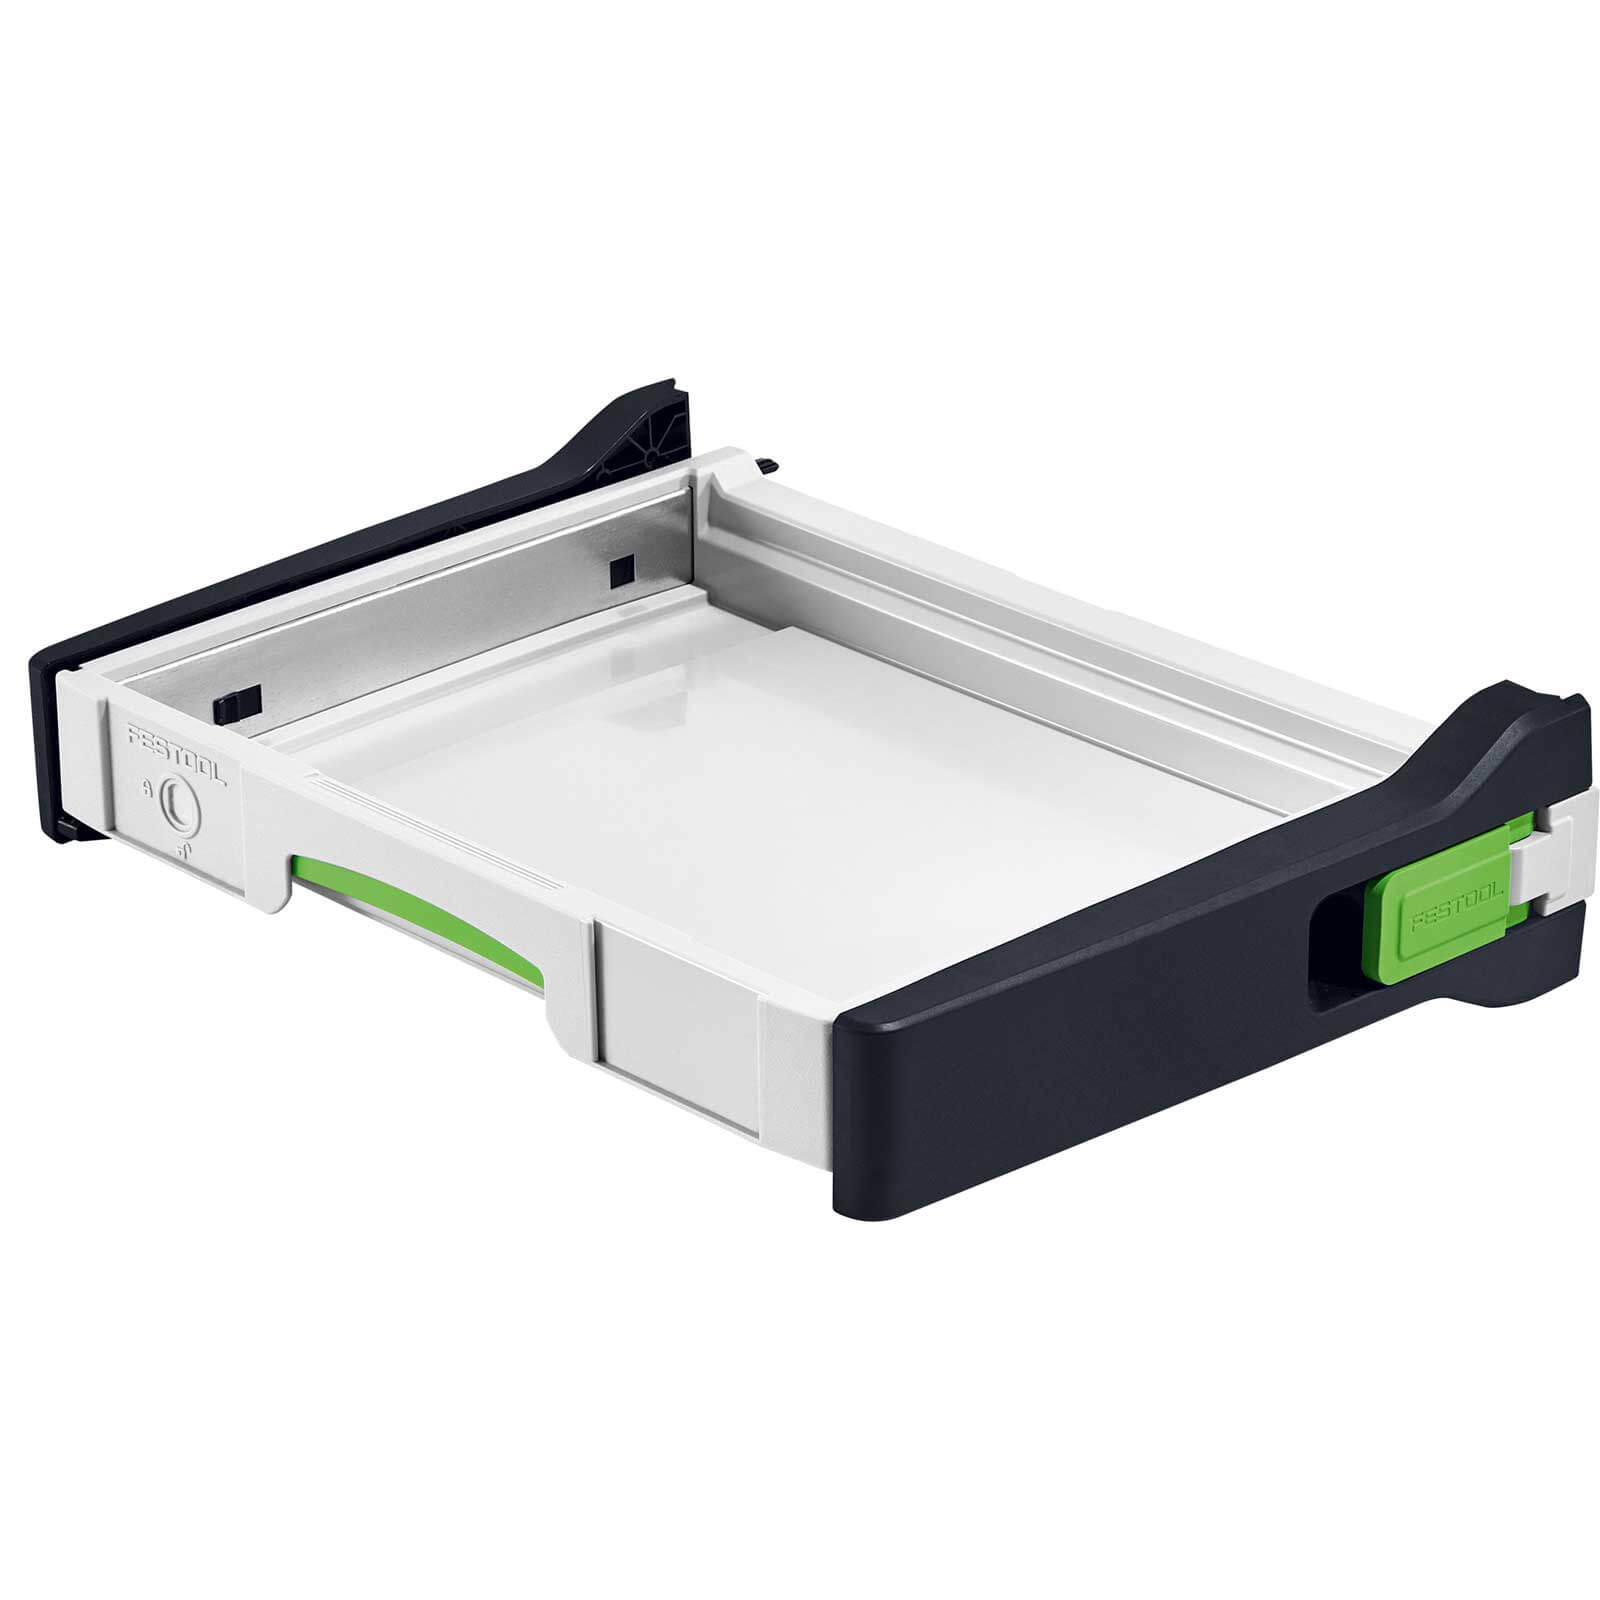 Image of Festool Pull Out Systainer Drawer for Mobile Workshop